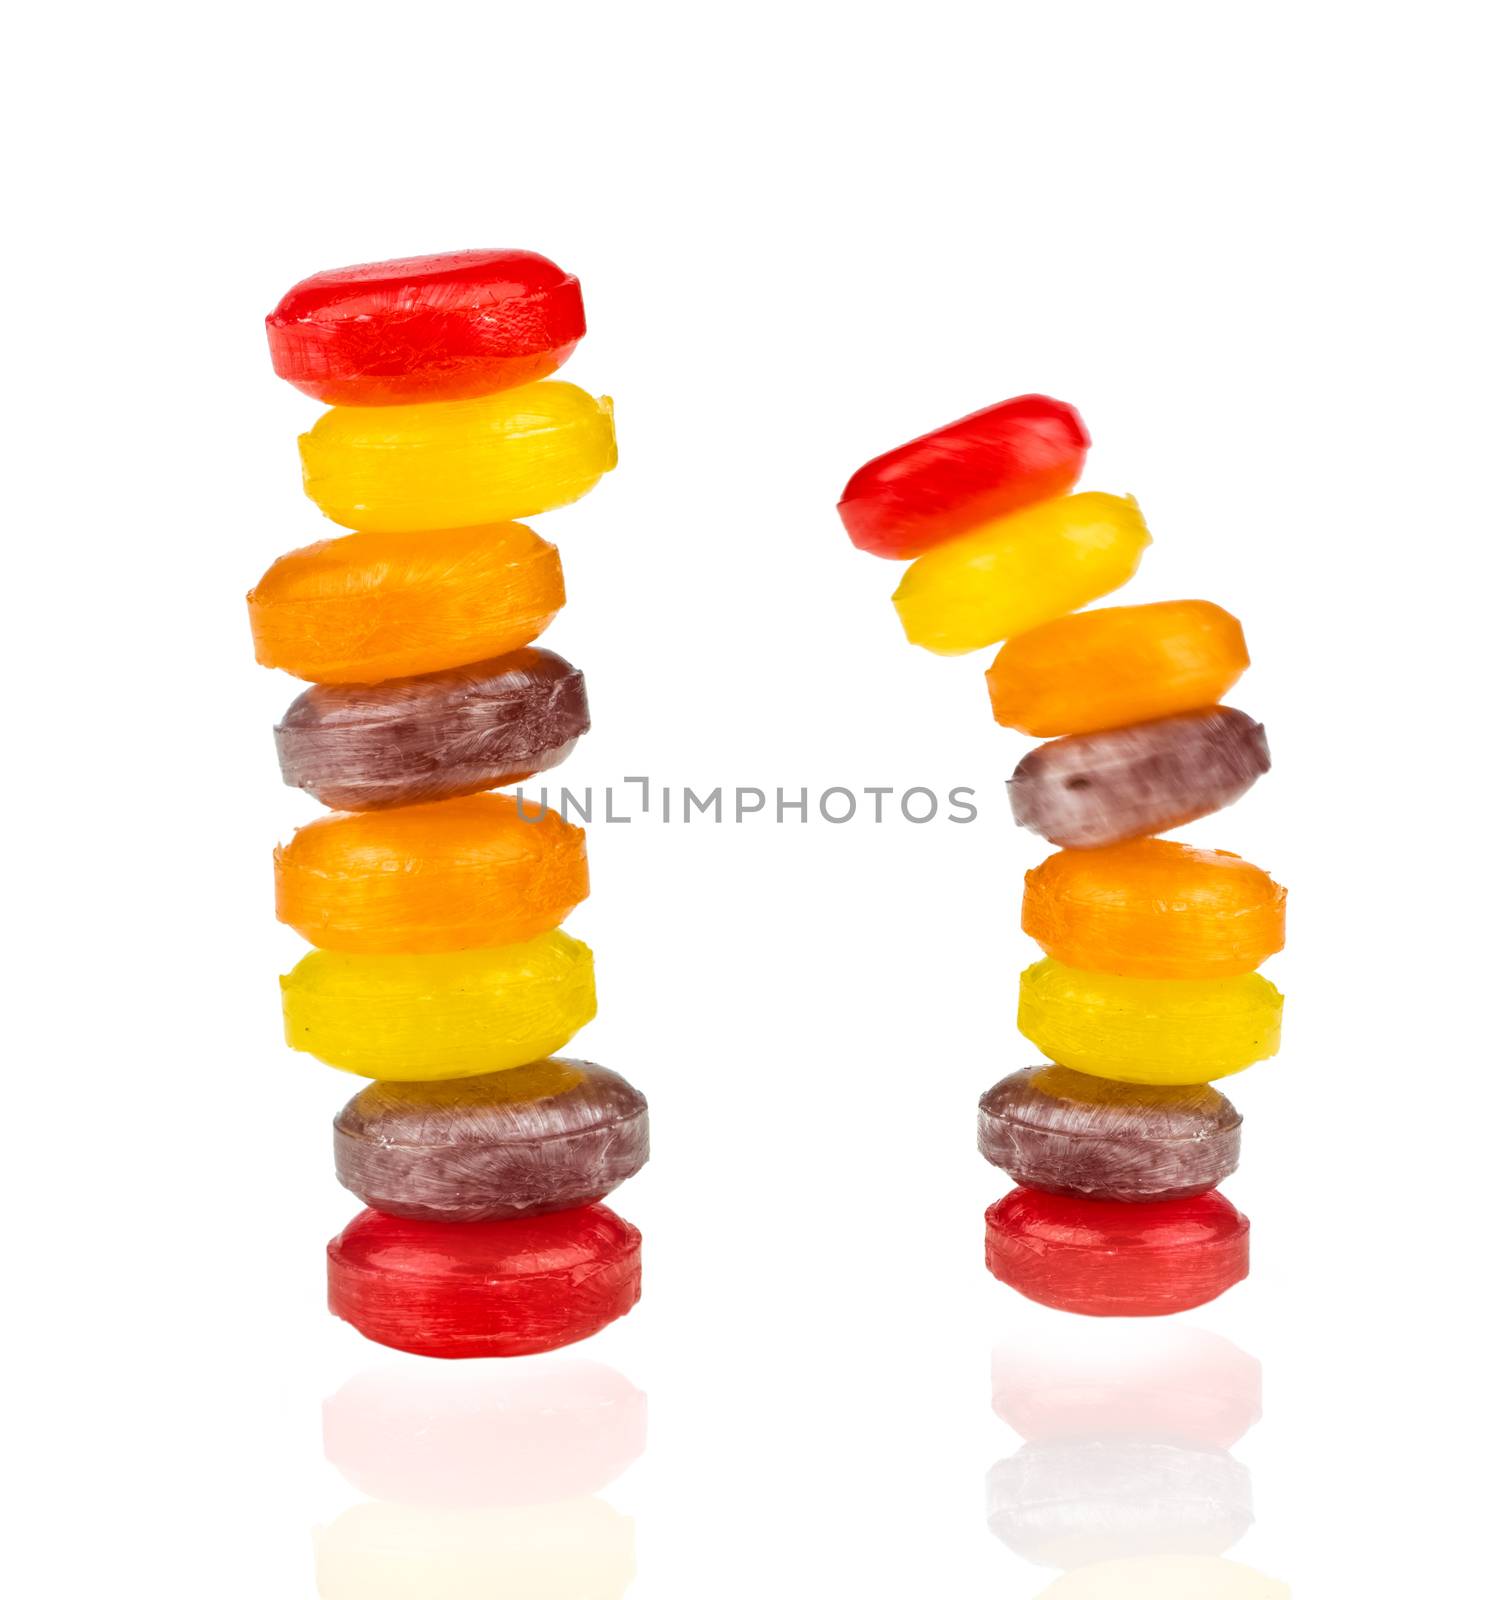 Medical lozenges for relief cough, sore throat and throat irritation isolated on white background. Cough and colds drop. Colorful cough pastille. Red, orange, yellow, and purple round candy or sweets.